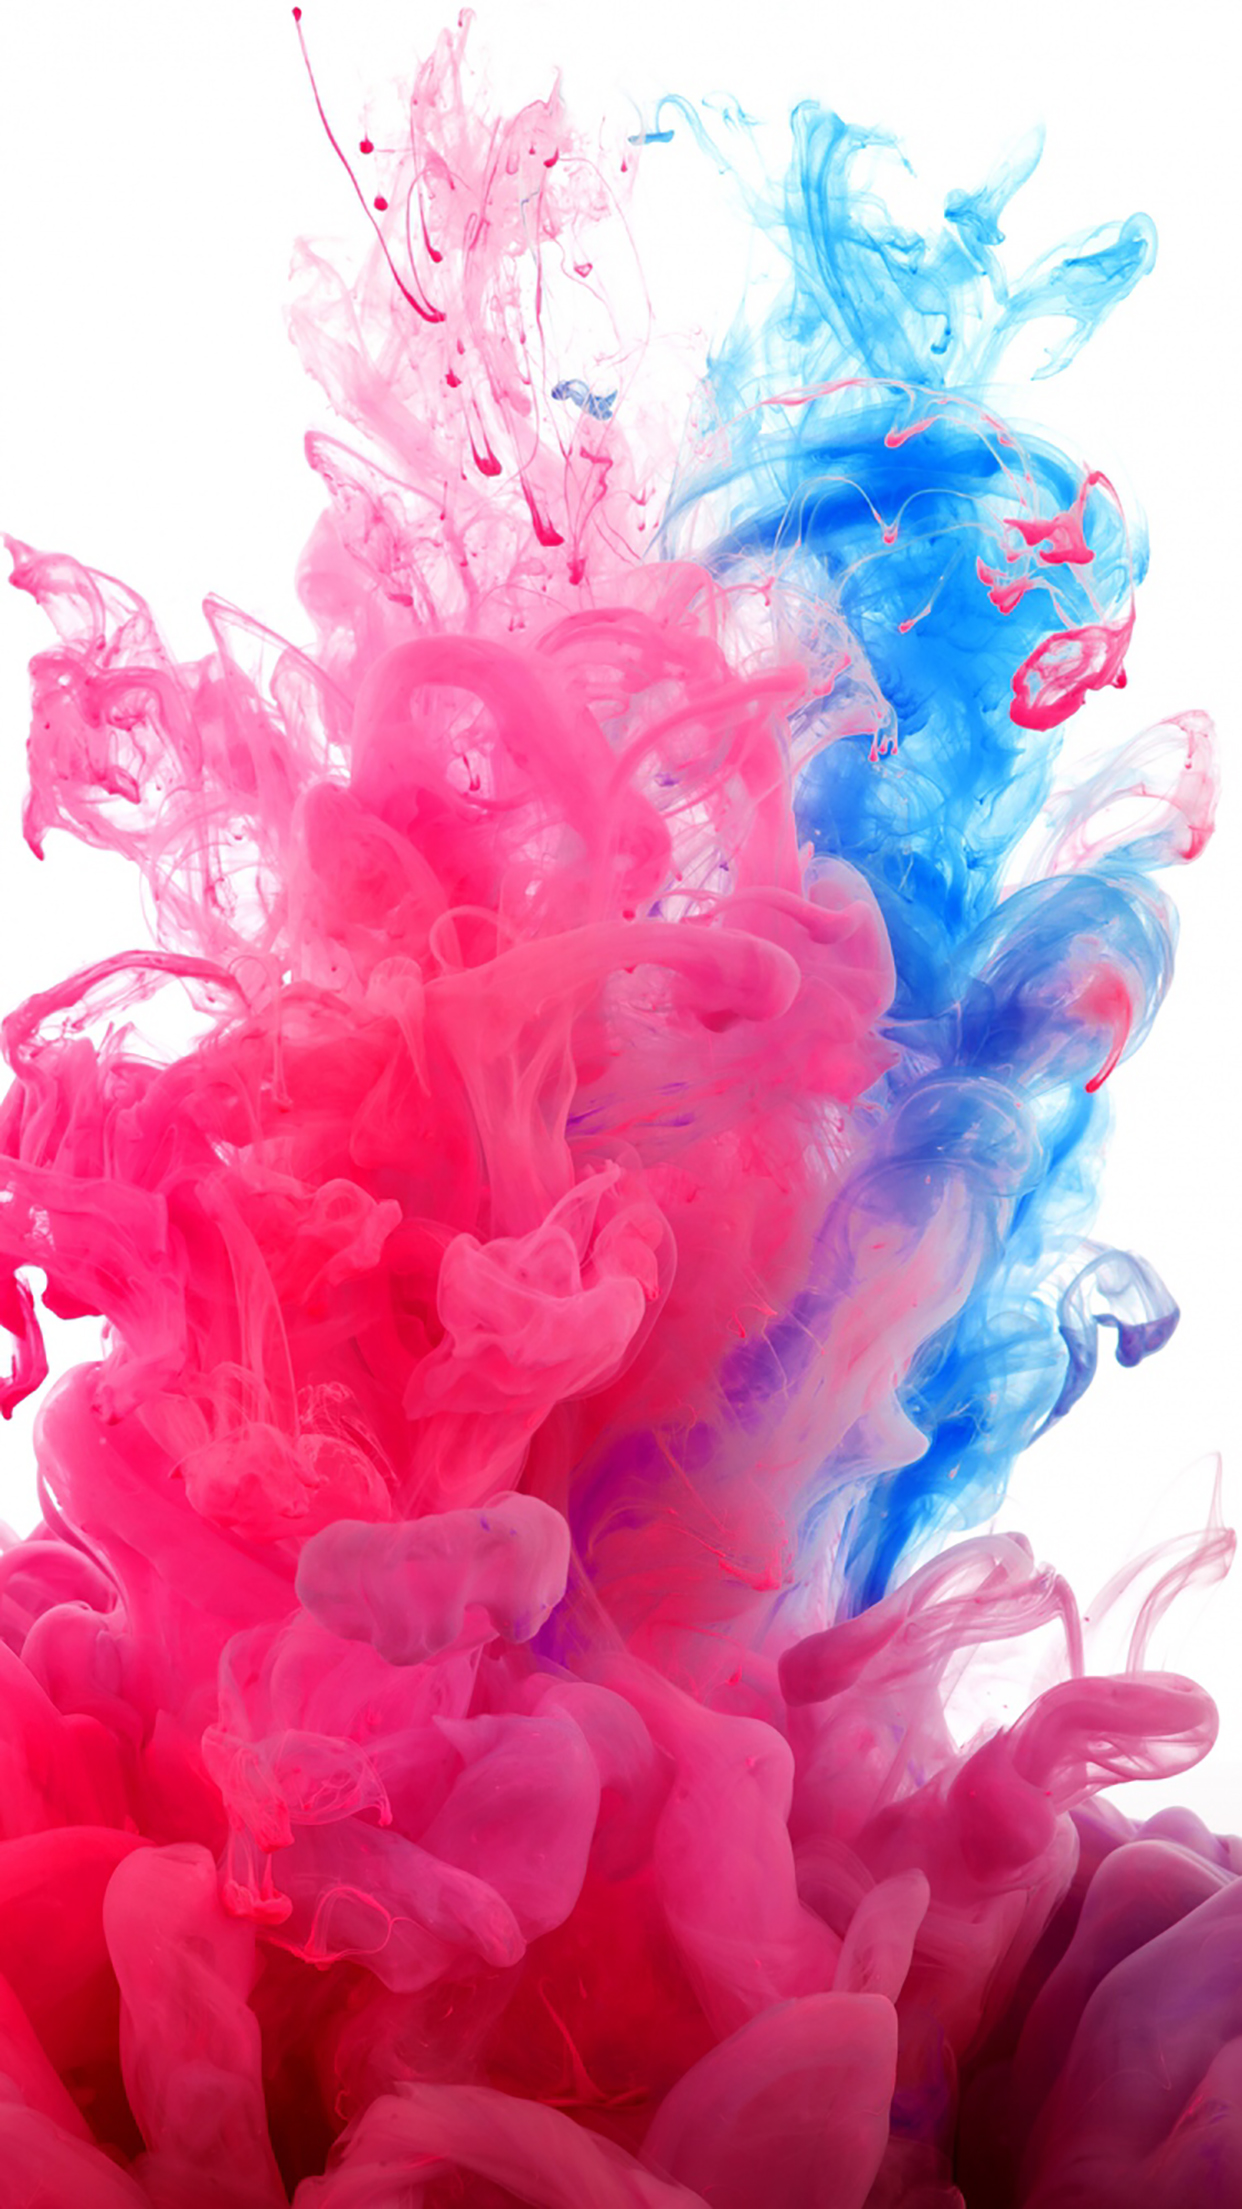 Ink, Pink And Blue Wallpaper for iPhone Pro Max, X, 6